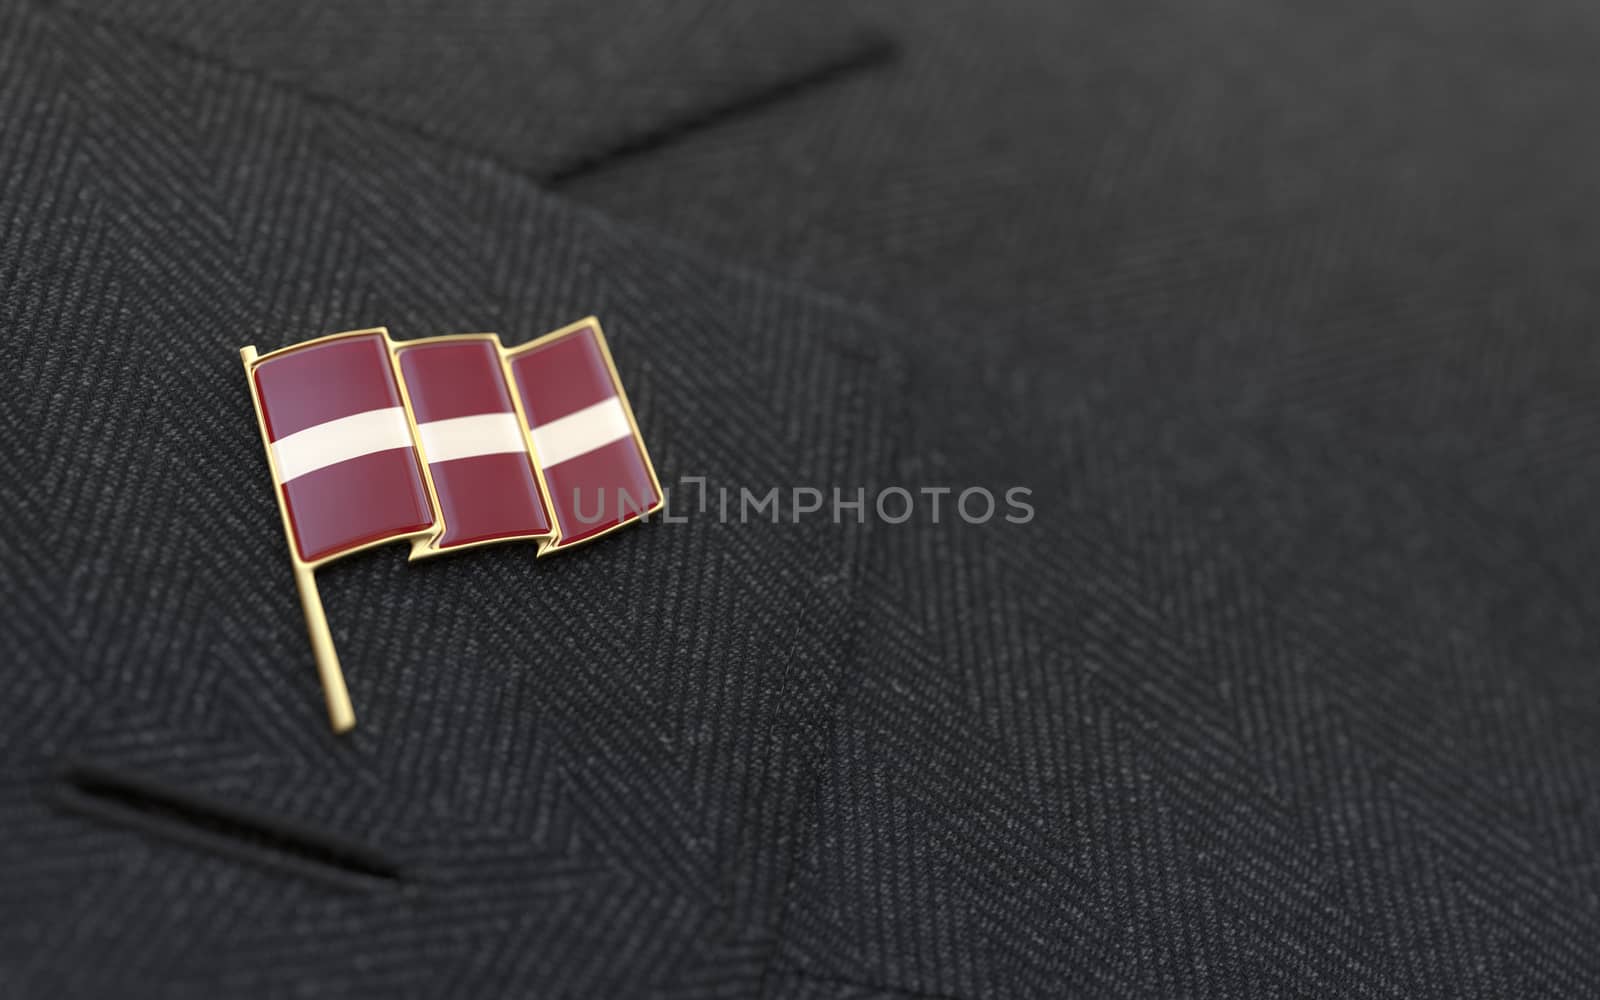 Latvia flag lapel pin on the collar of a business suit jacket shows patriotism